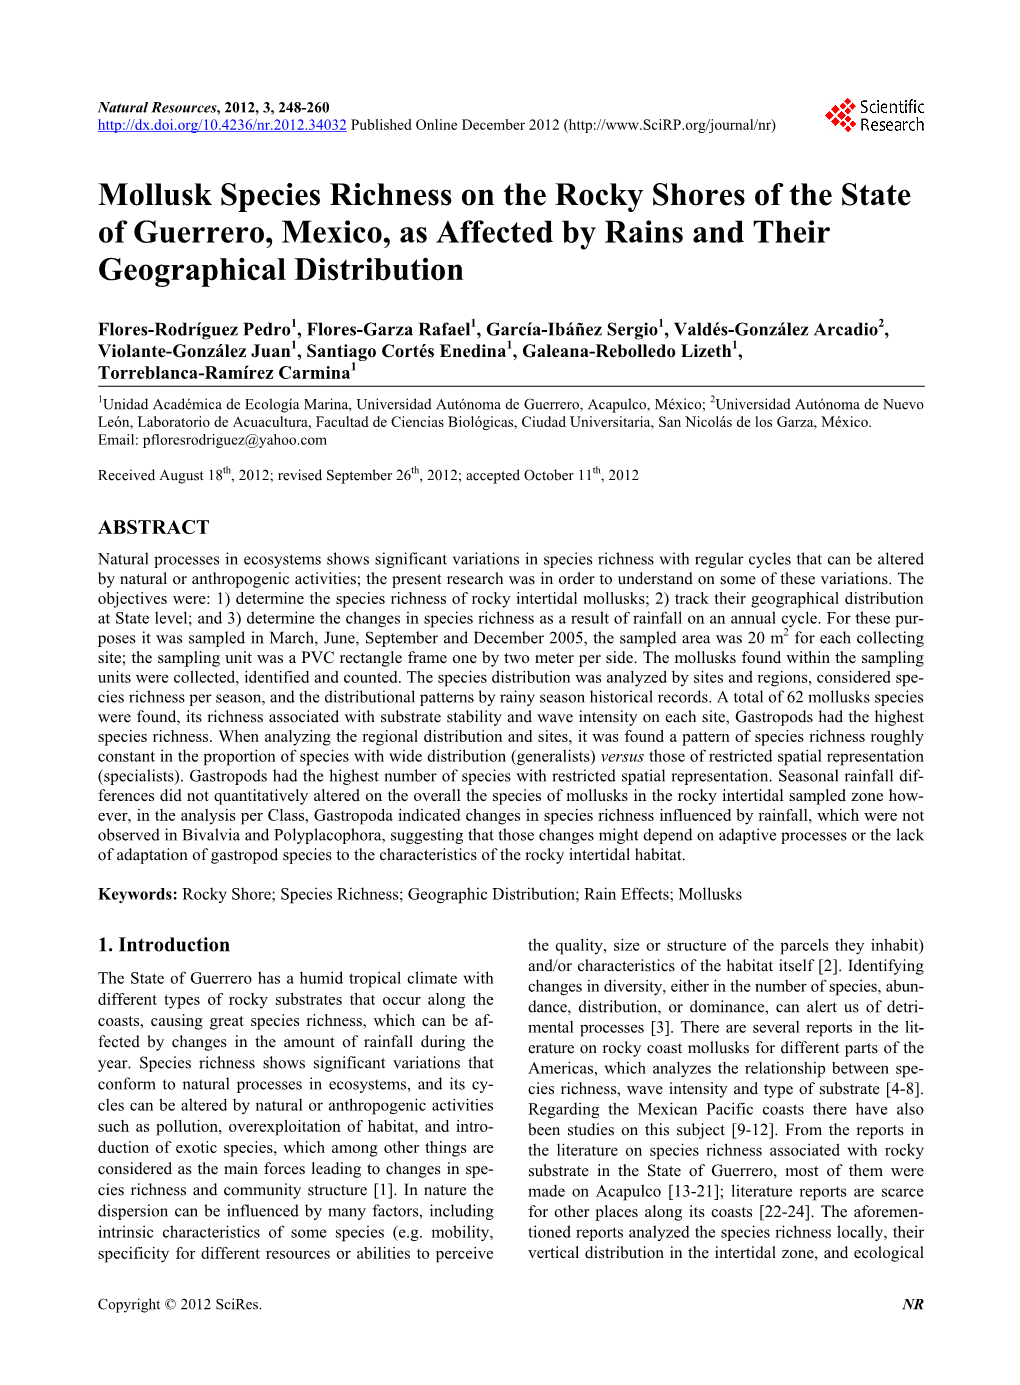 Mollusk Species Richness on the Rocky Shores of the State of Guerrero, Mexico, As Affected by Rains and Their Geographical Distribution